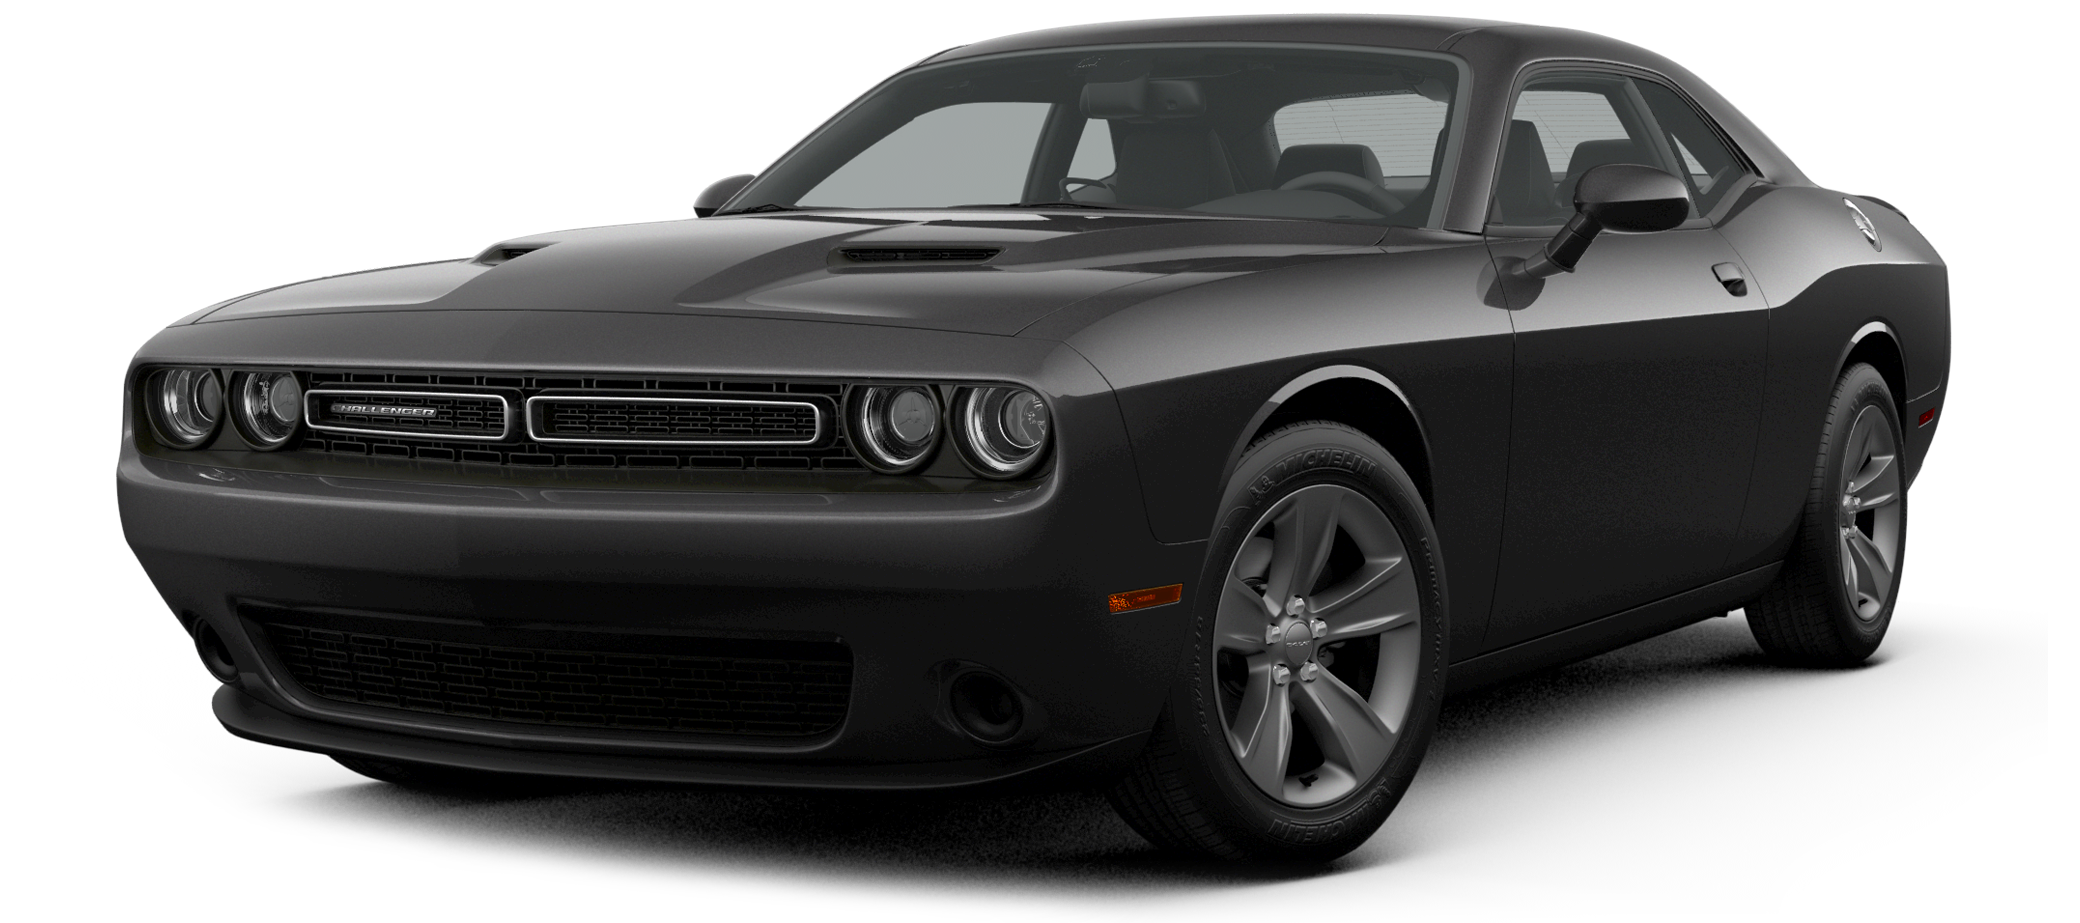 2021 Dodge Challenger Coupe